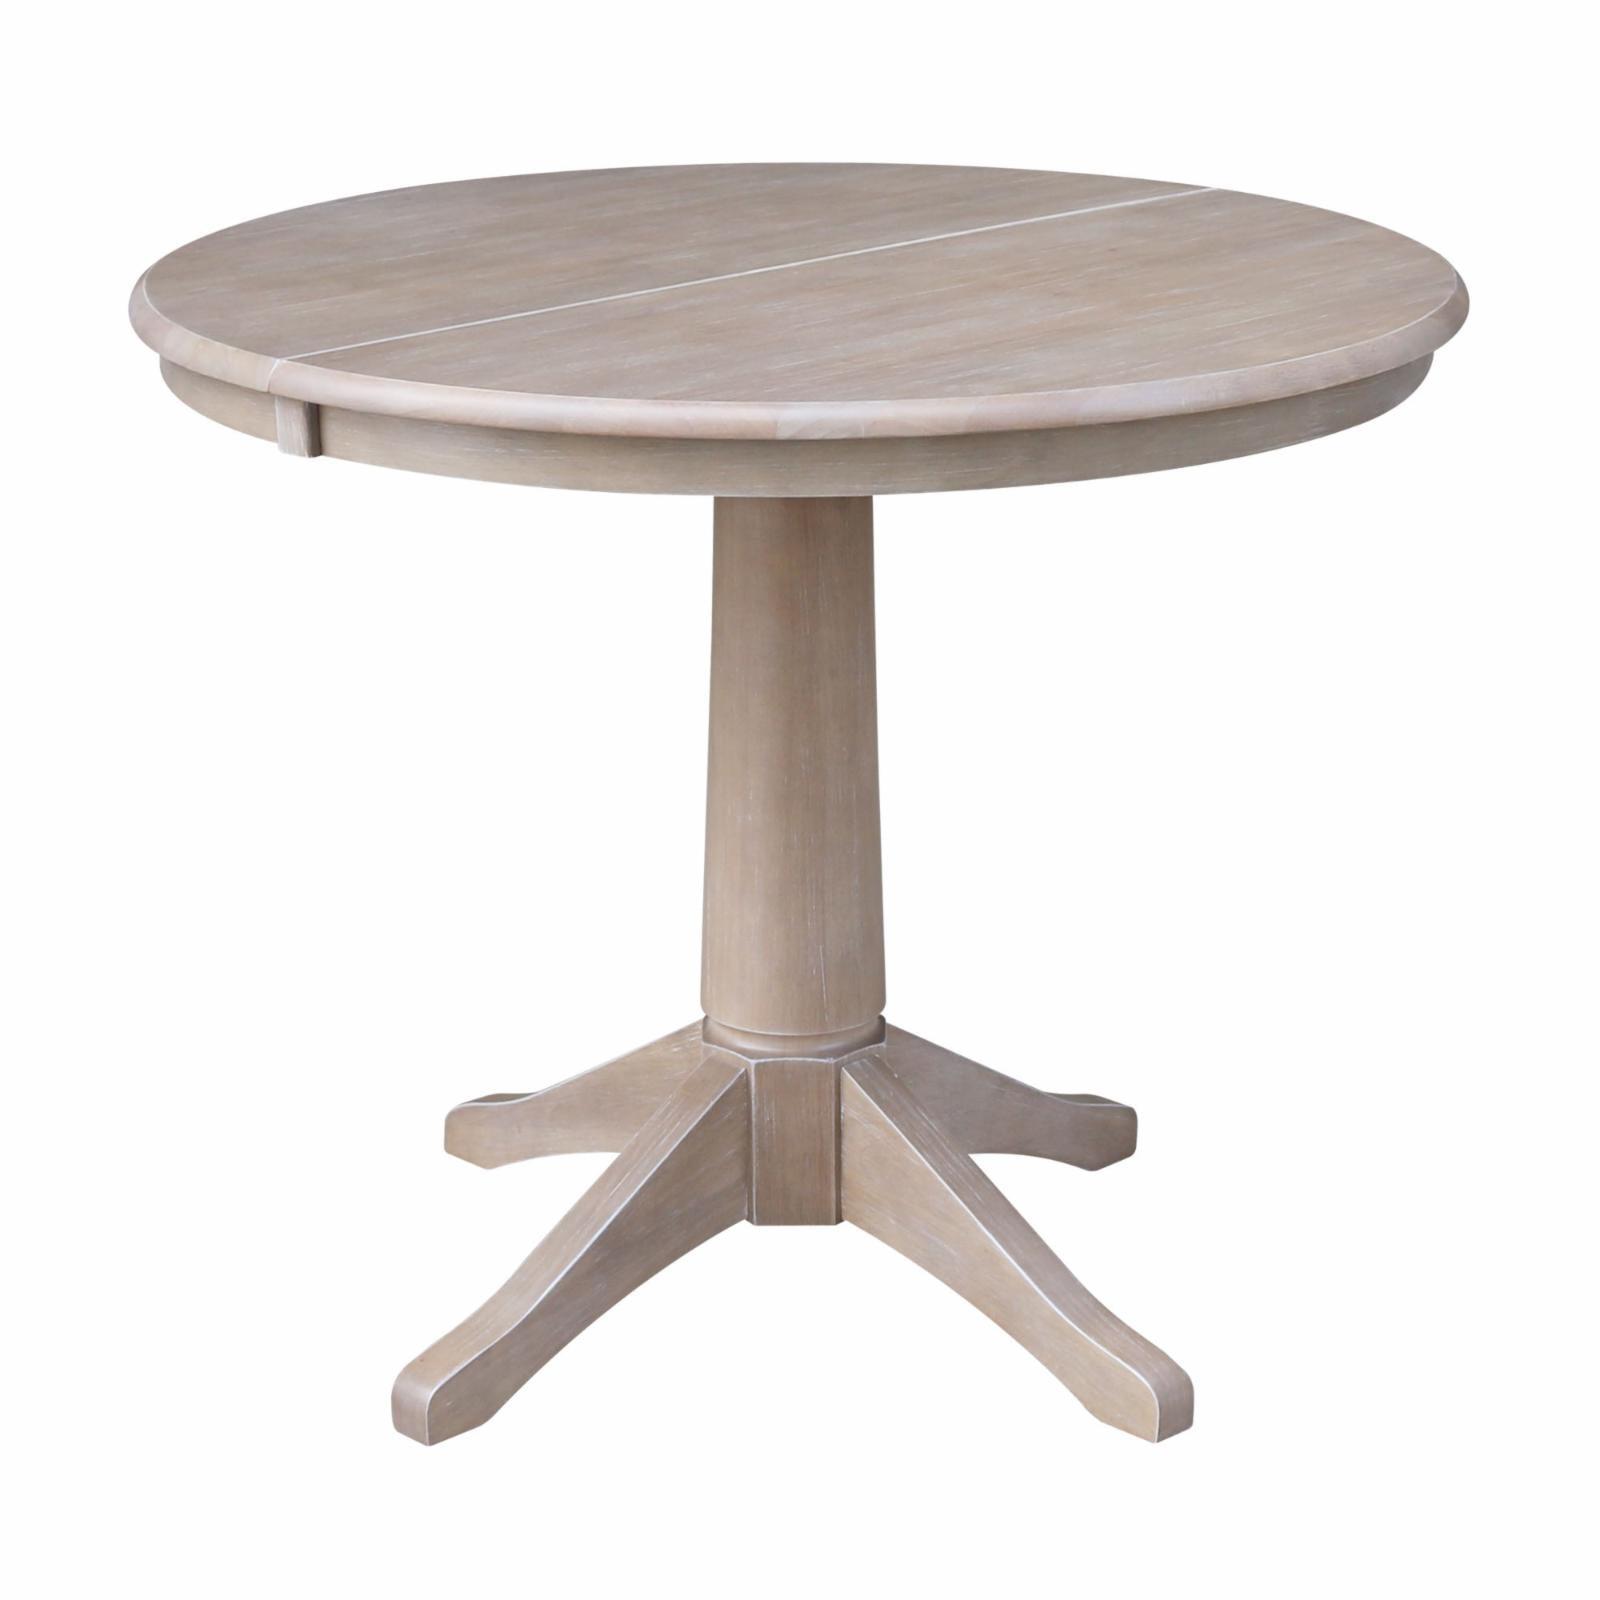 Cottage Charm 50.8" Round Wood Extendable Dining Table